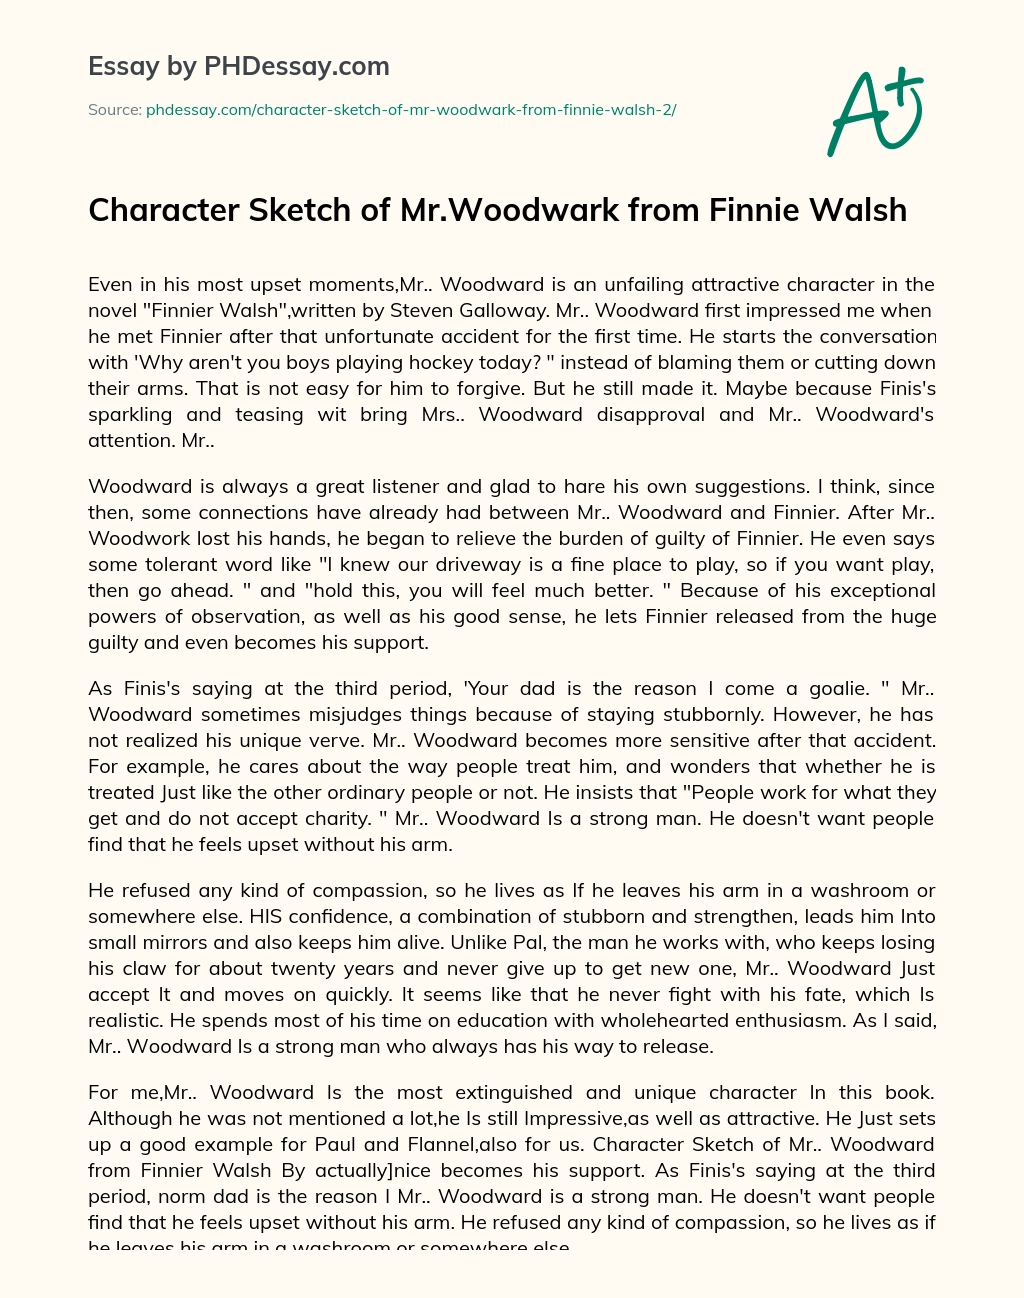 Character Sketch of Mr.Woodwark from Finnie Walsh essay